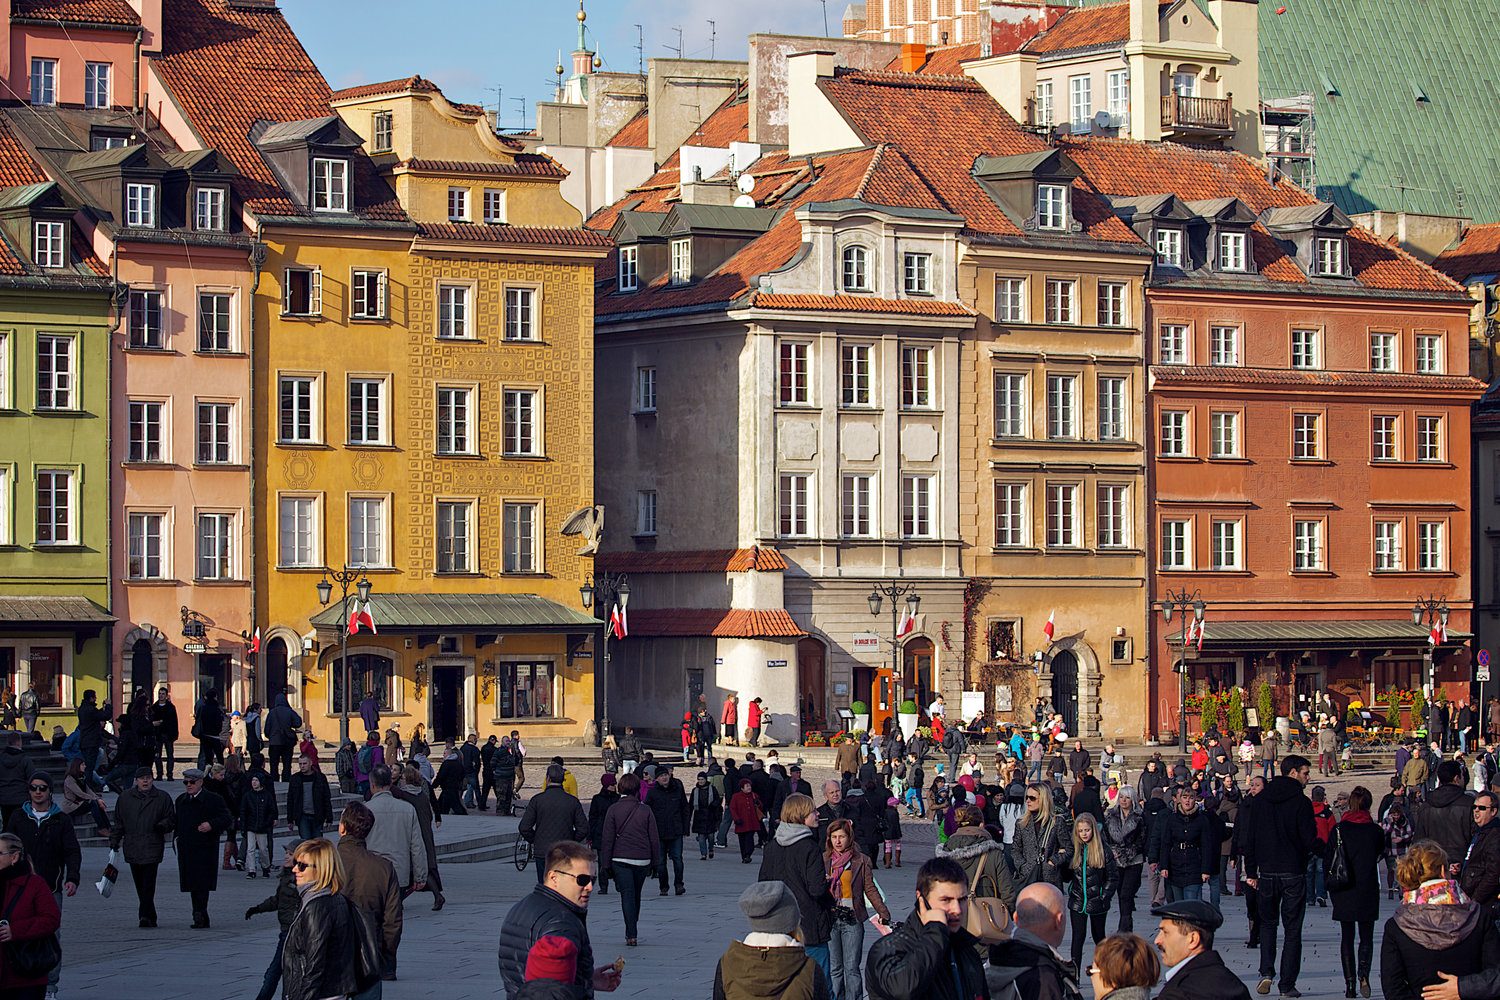 Stay in Poland - number of foreigners is increasing